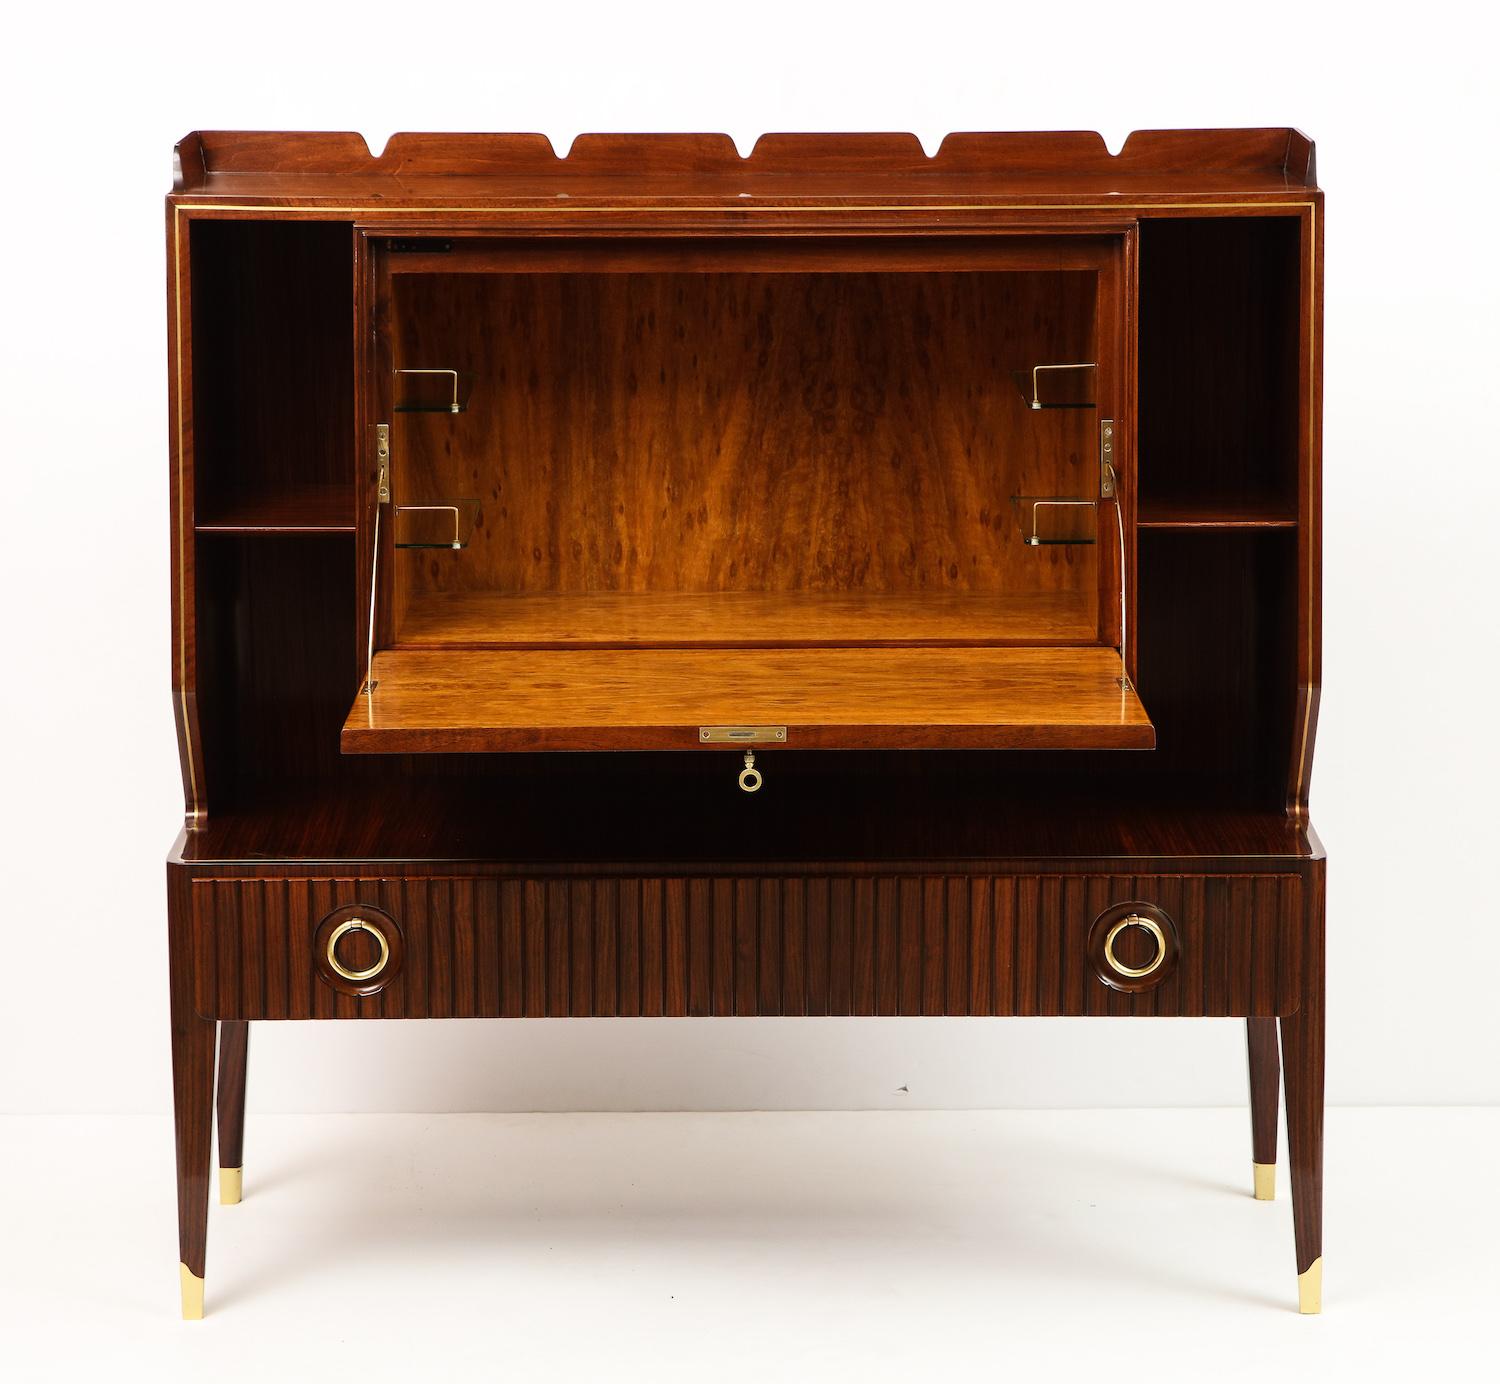 Paolo Buffa rare drop-front bar cabinet. Rosewood cabinet with light wood inlays, produced by Serafino Arrighi, Cantú. Drop-front panel opens to reveal burled wood interior and glass shelves. This Buffa cabinet also features open storage